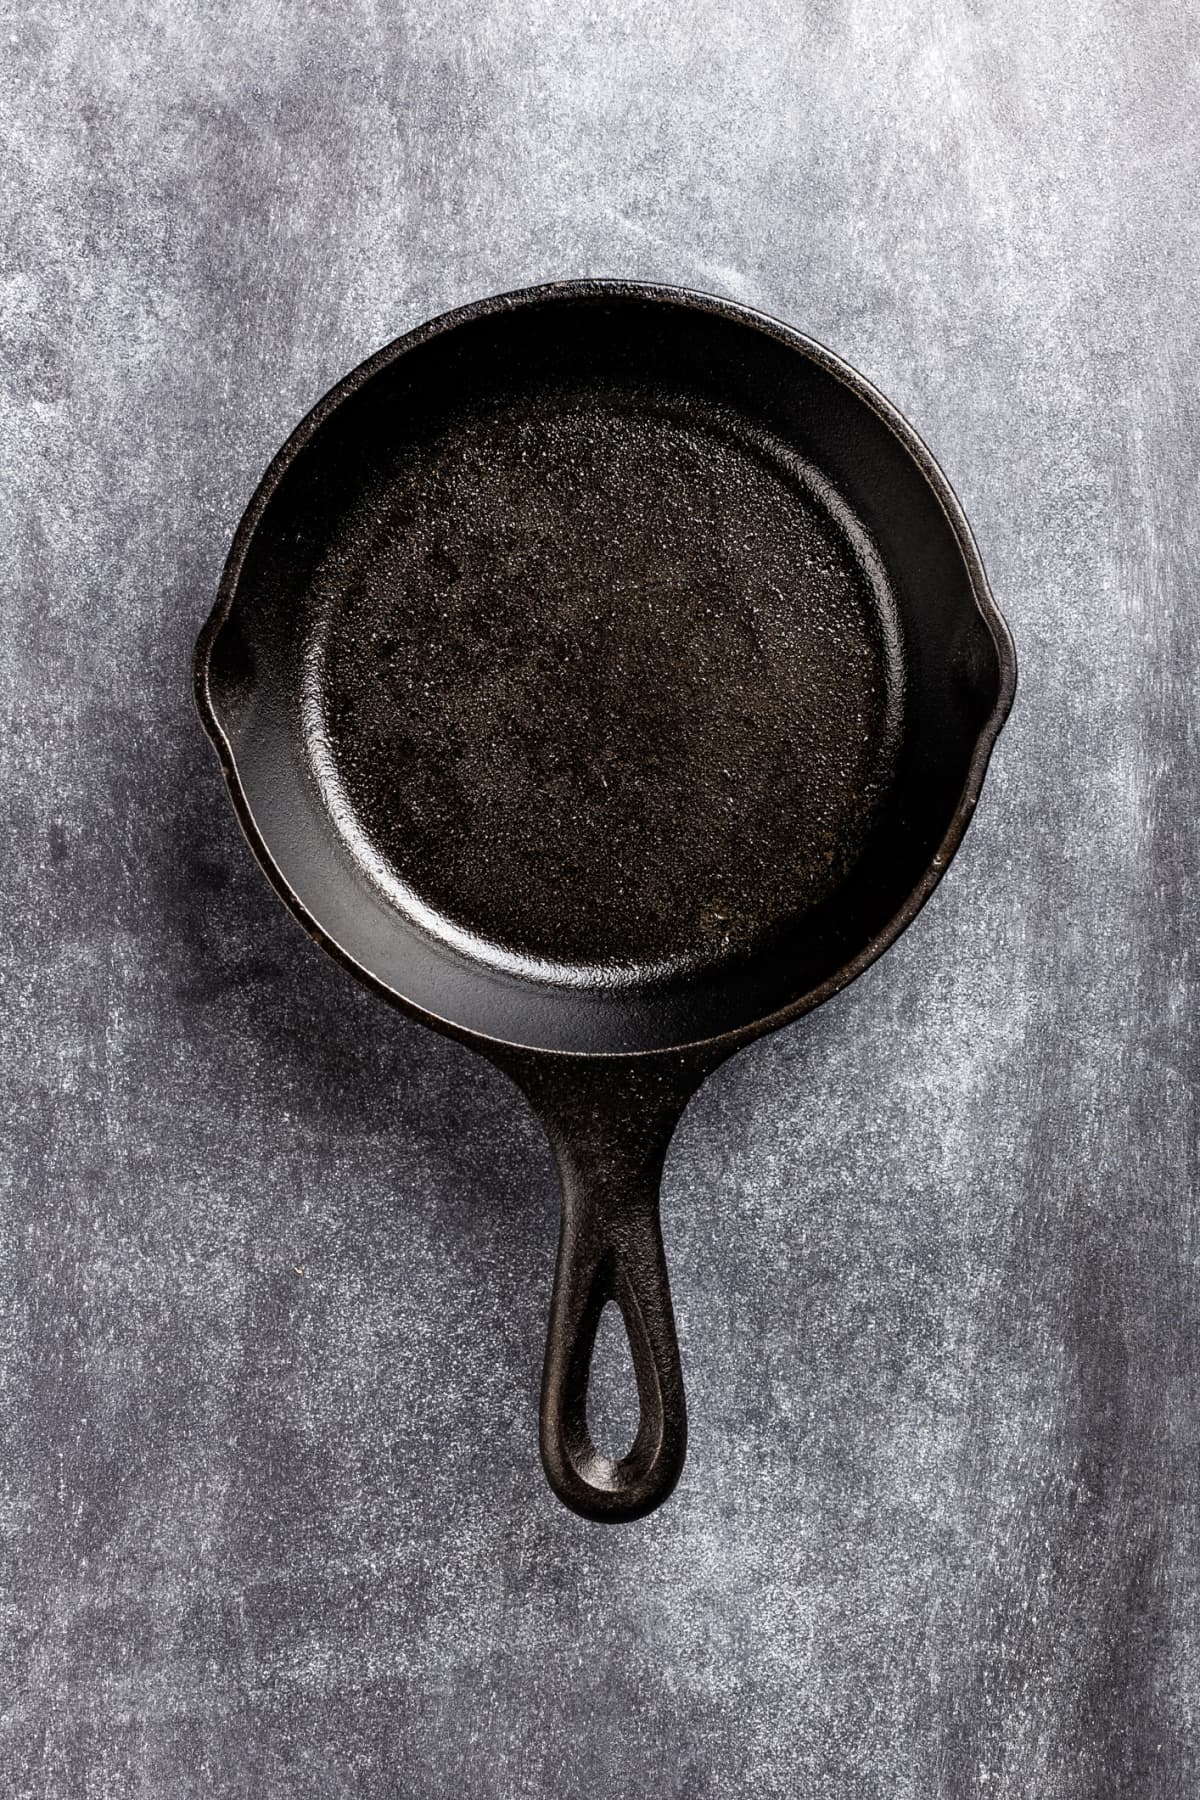 Old rusted cast iron frying pan hanging on wall